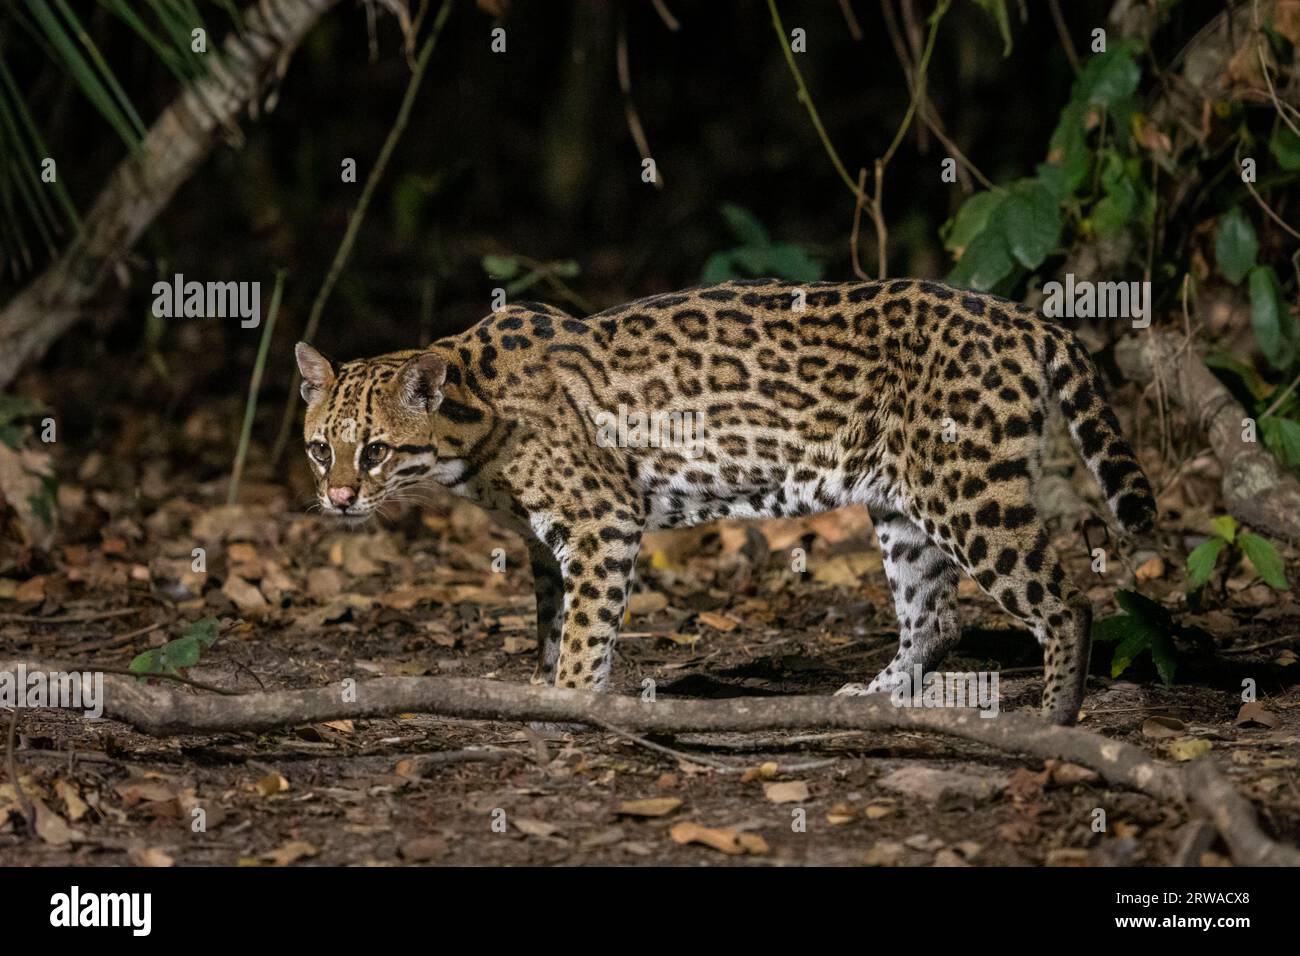 Ocelot (Leopardus pardalis) on the ground at night in the Pantanal Stock Photo